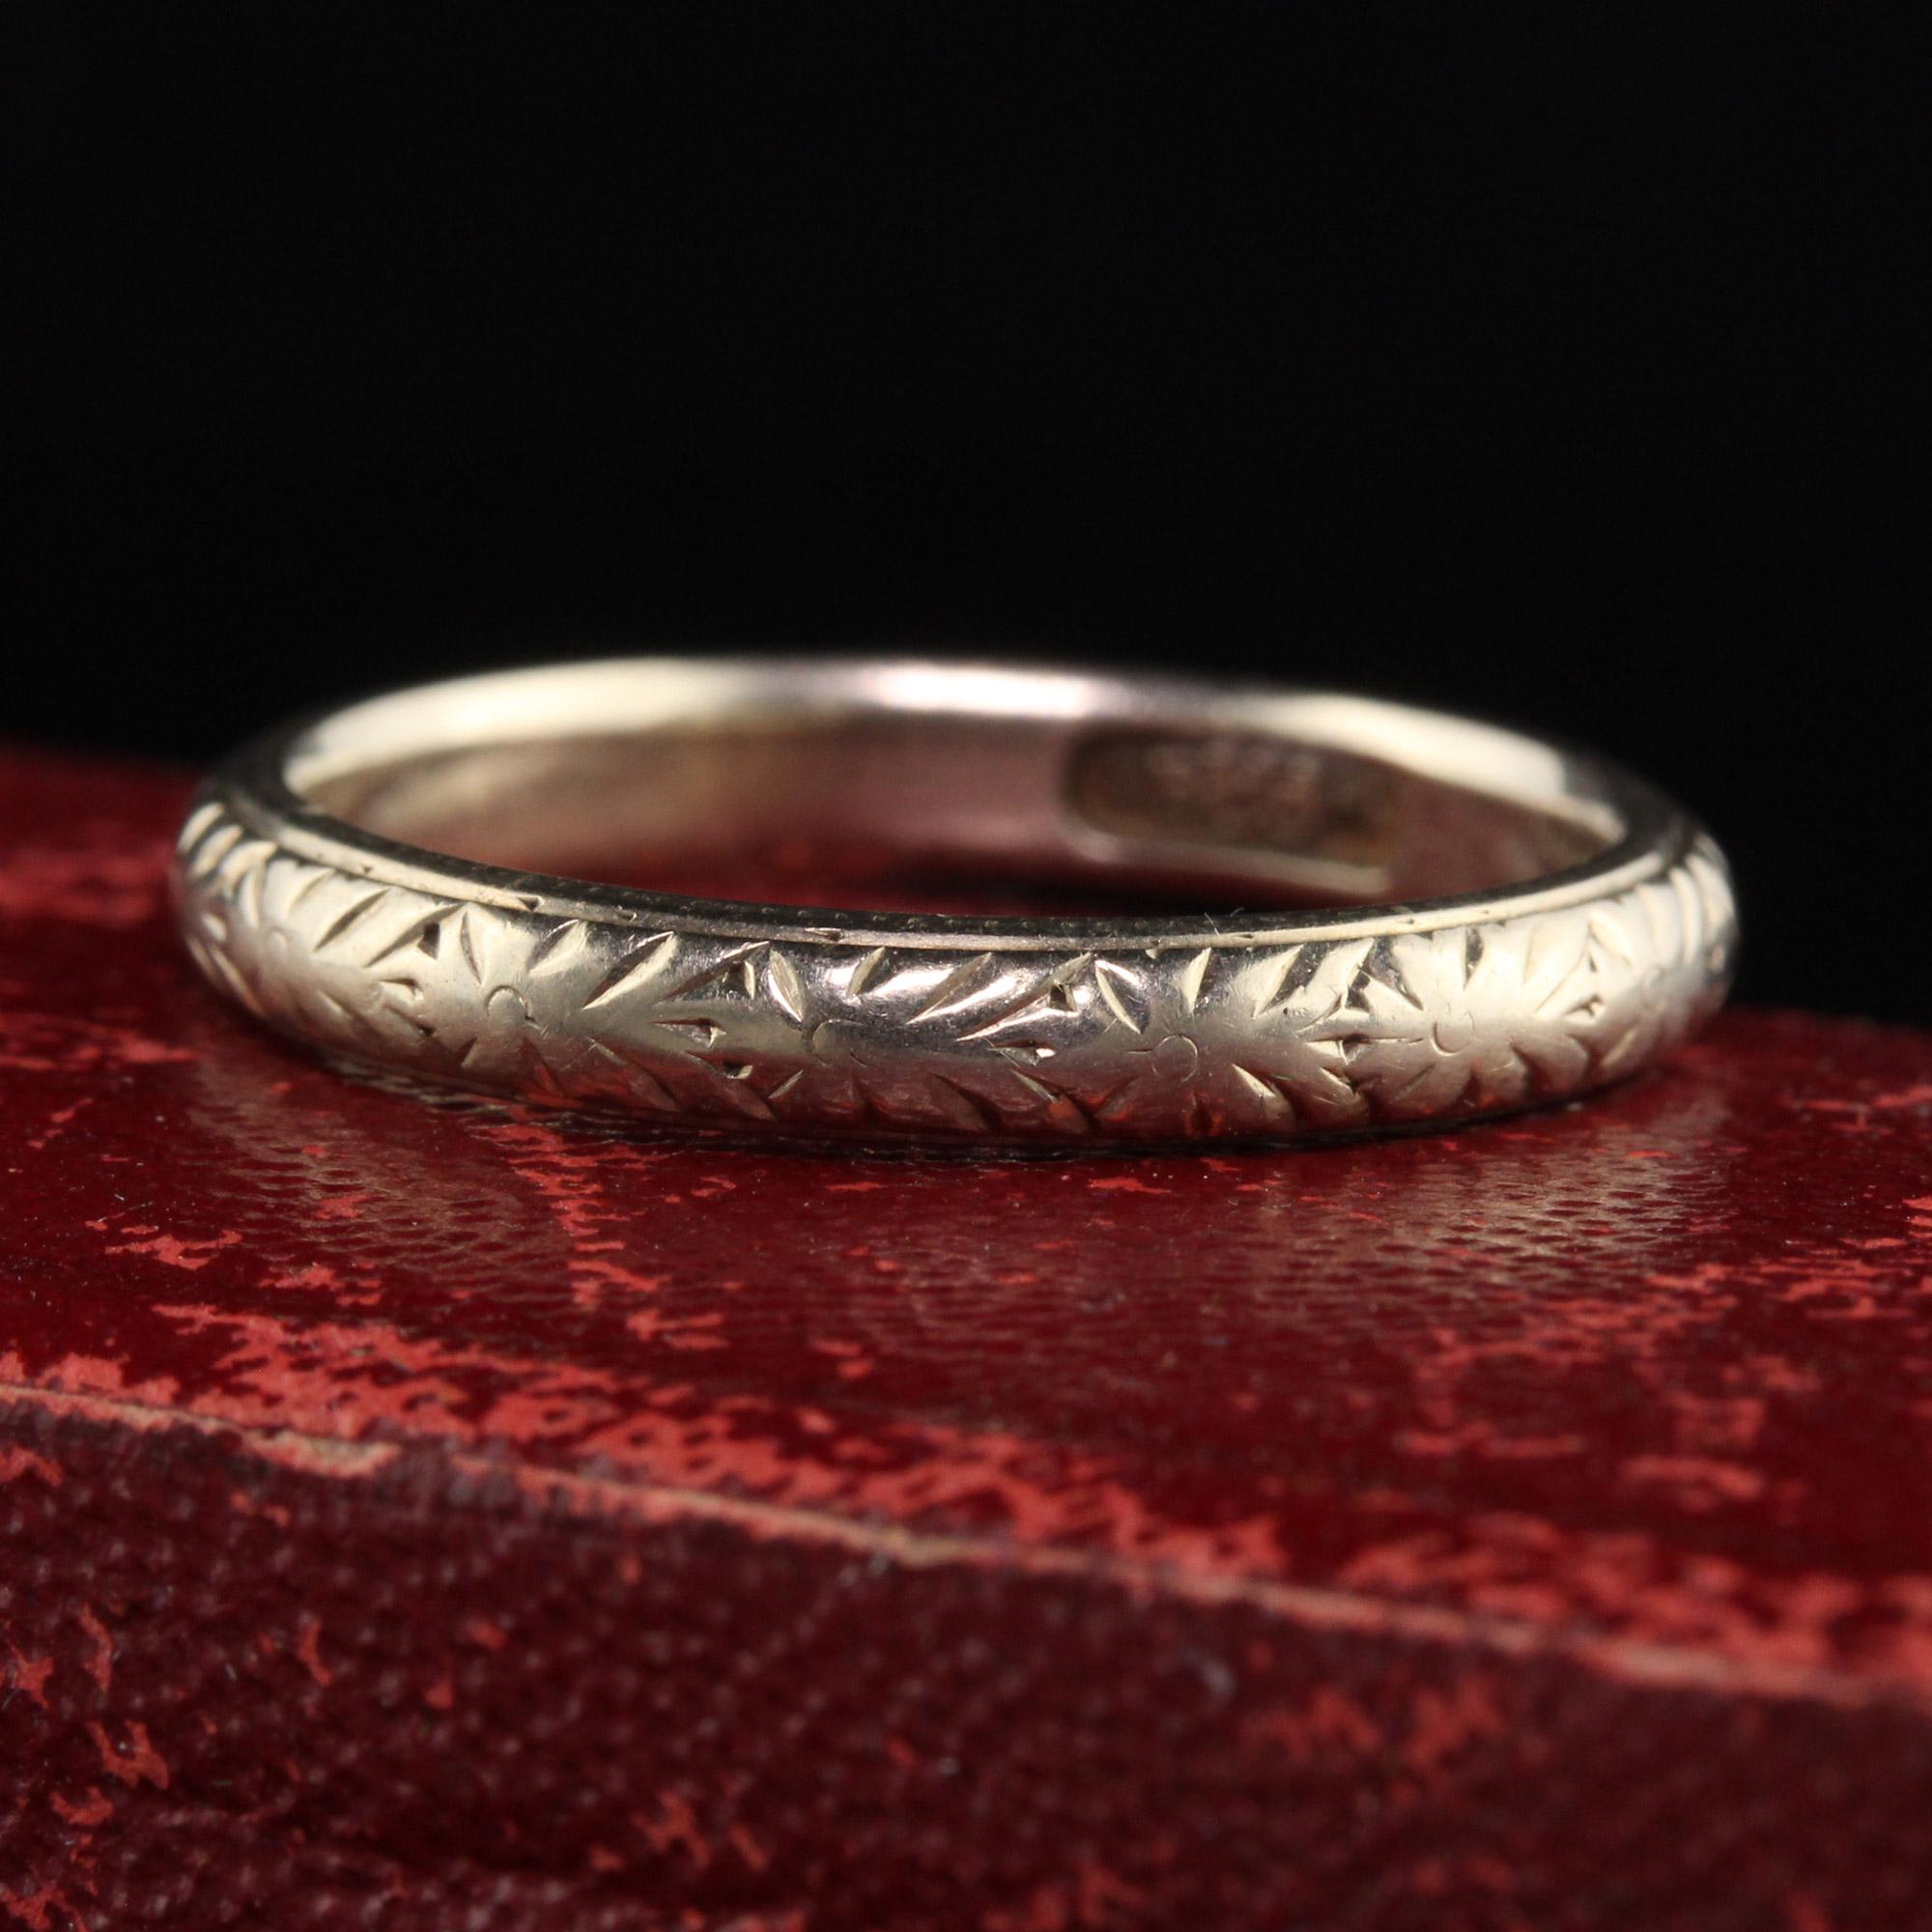 Beautiful Antique Art Deco Hayden W. Wheeler 18K White Gold Engraved Wedding Band. This gorgeous wedding band was made by Hayden Wheeler company and is crafted in 18K white gold. This ring has engravings going around the entire ring and 